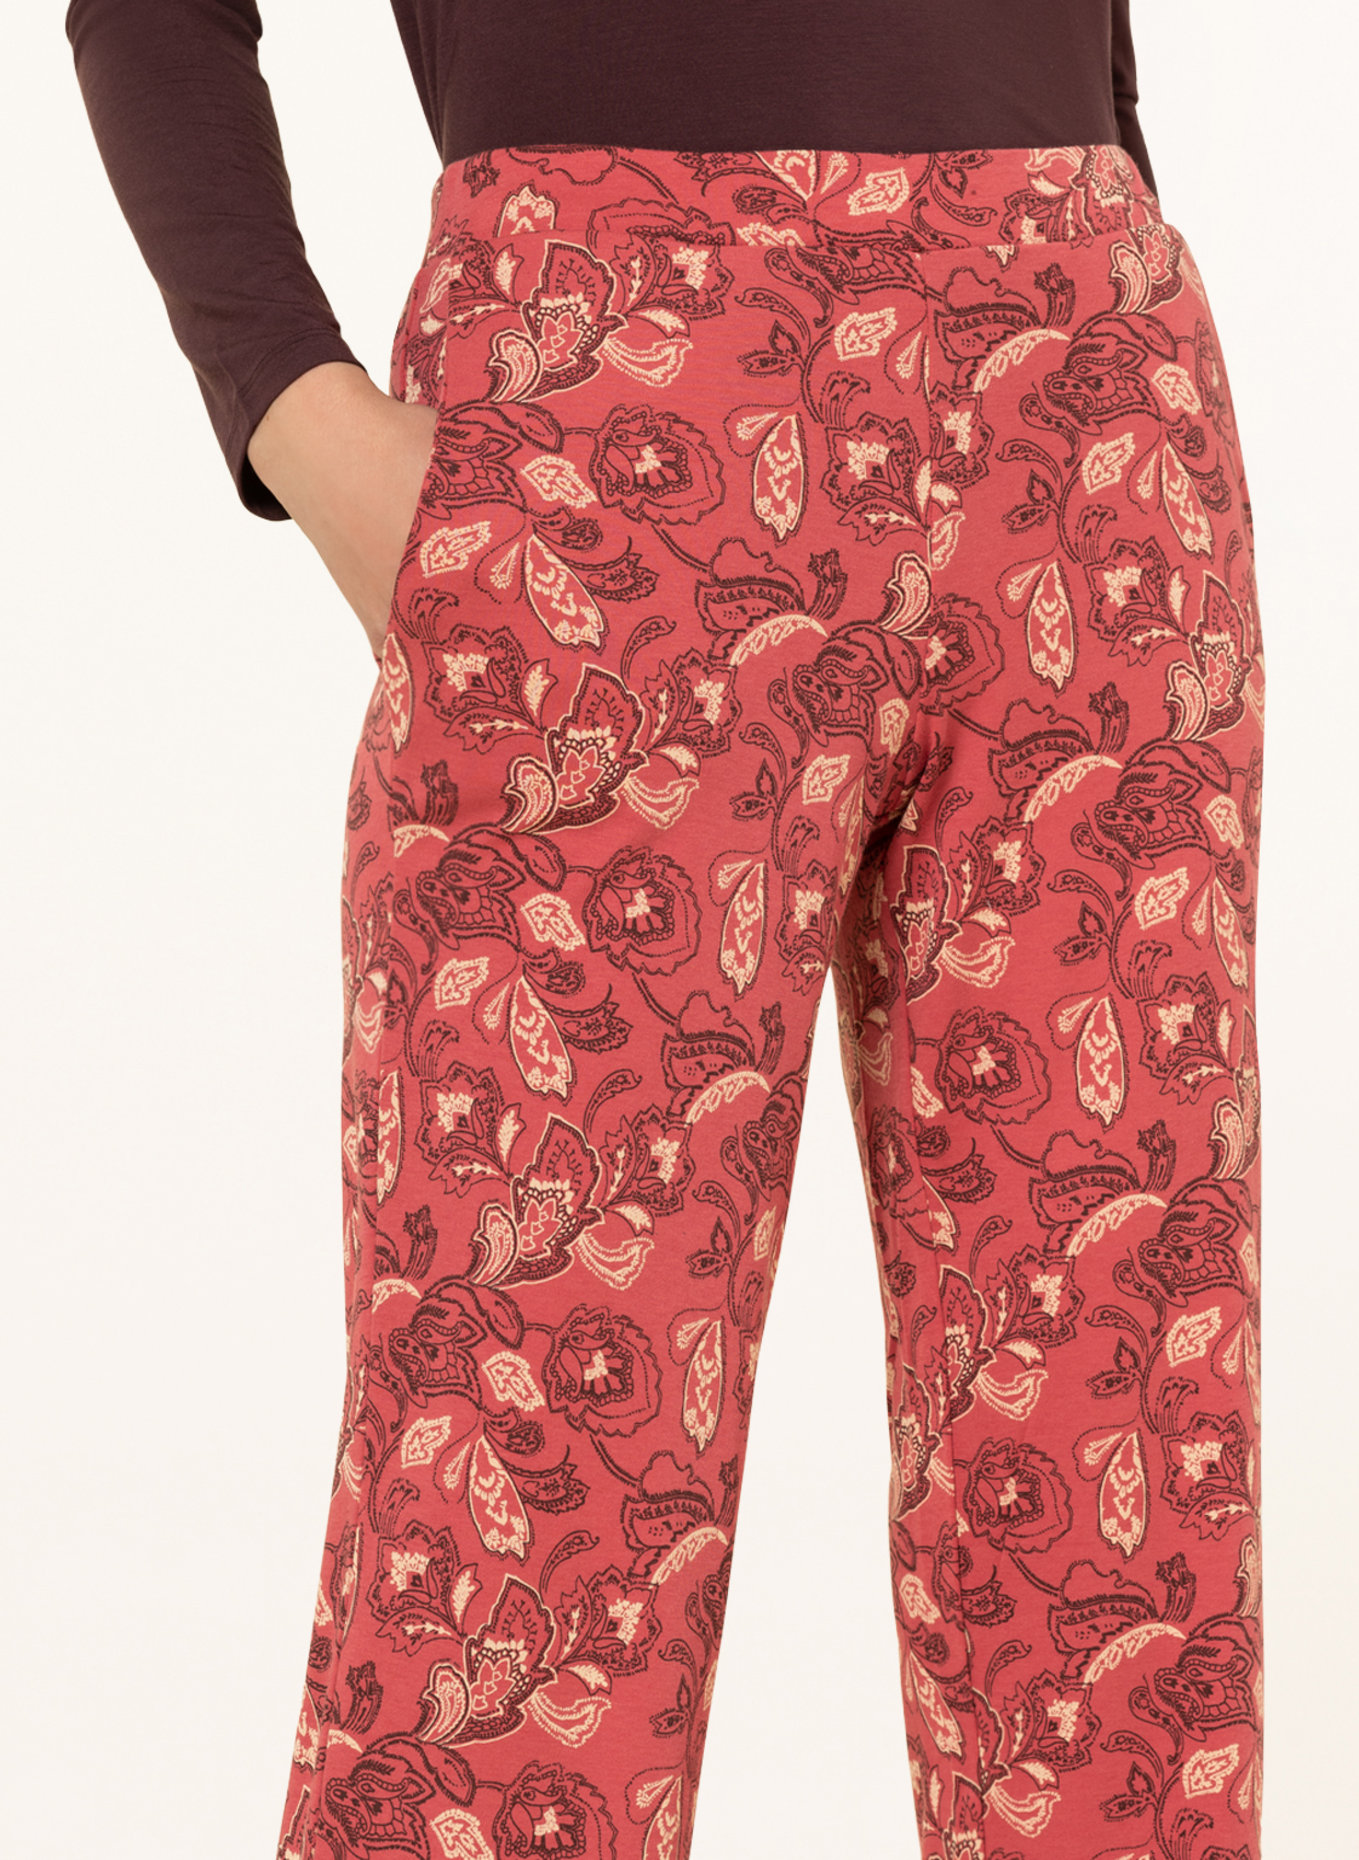 SCHIESSER Pajama pants MIX+RELAX, Color: LIGHT RED/ LIGHT YELLOW/ DARK BROWN (Image 5)